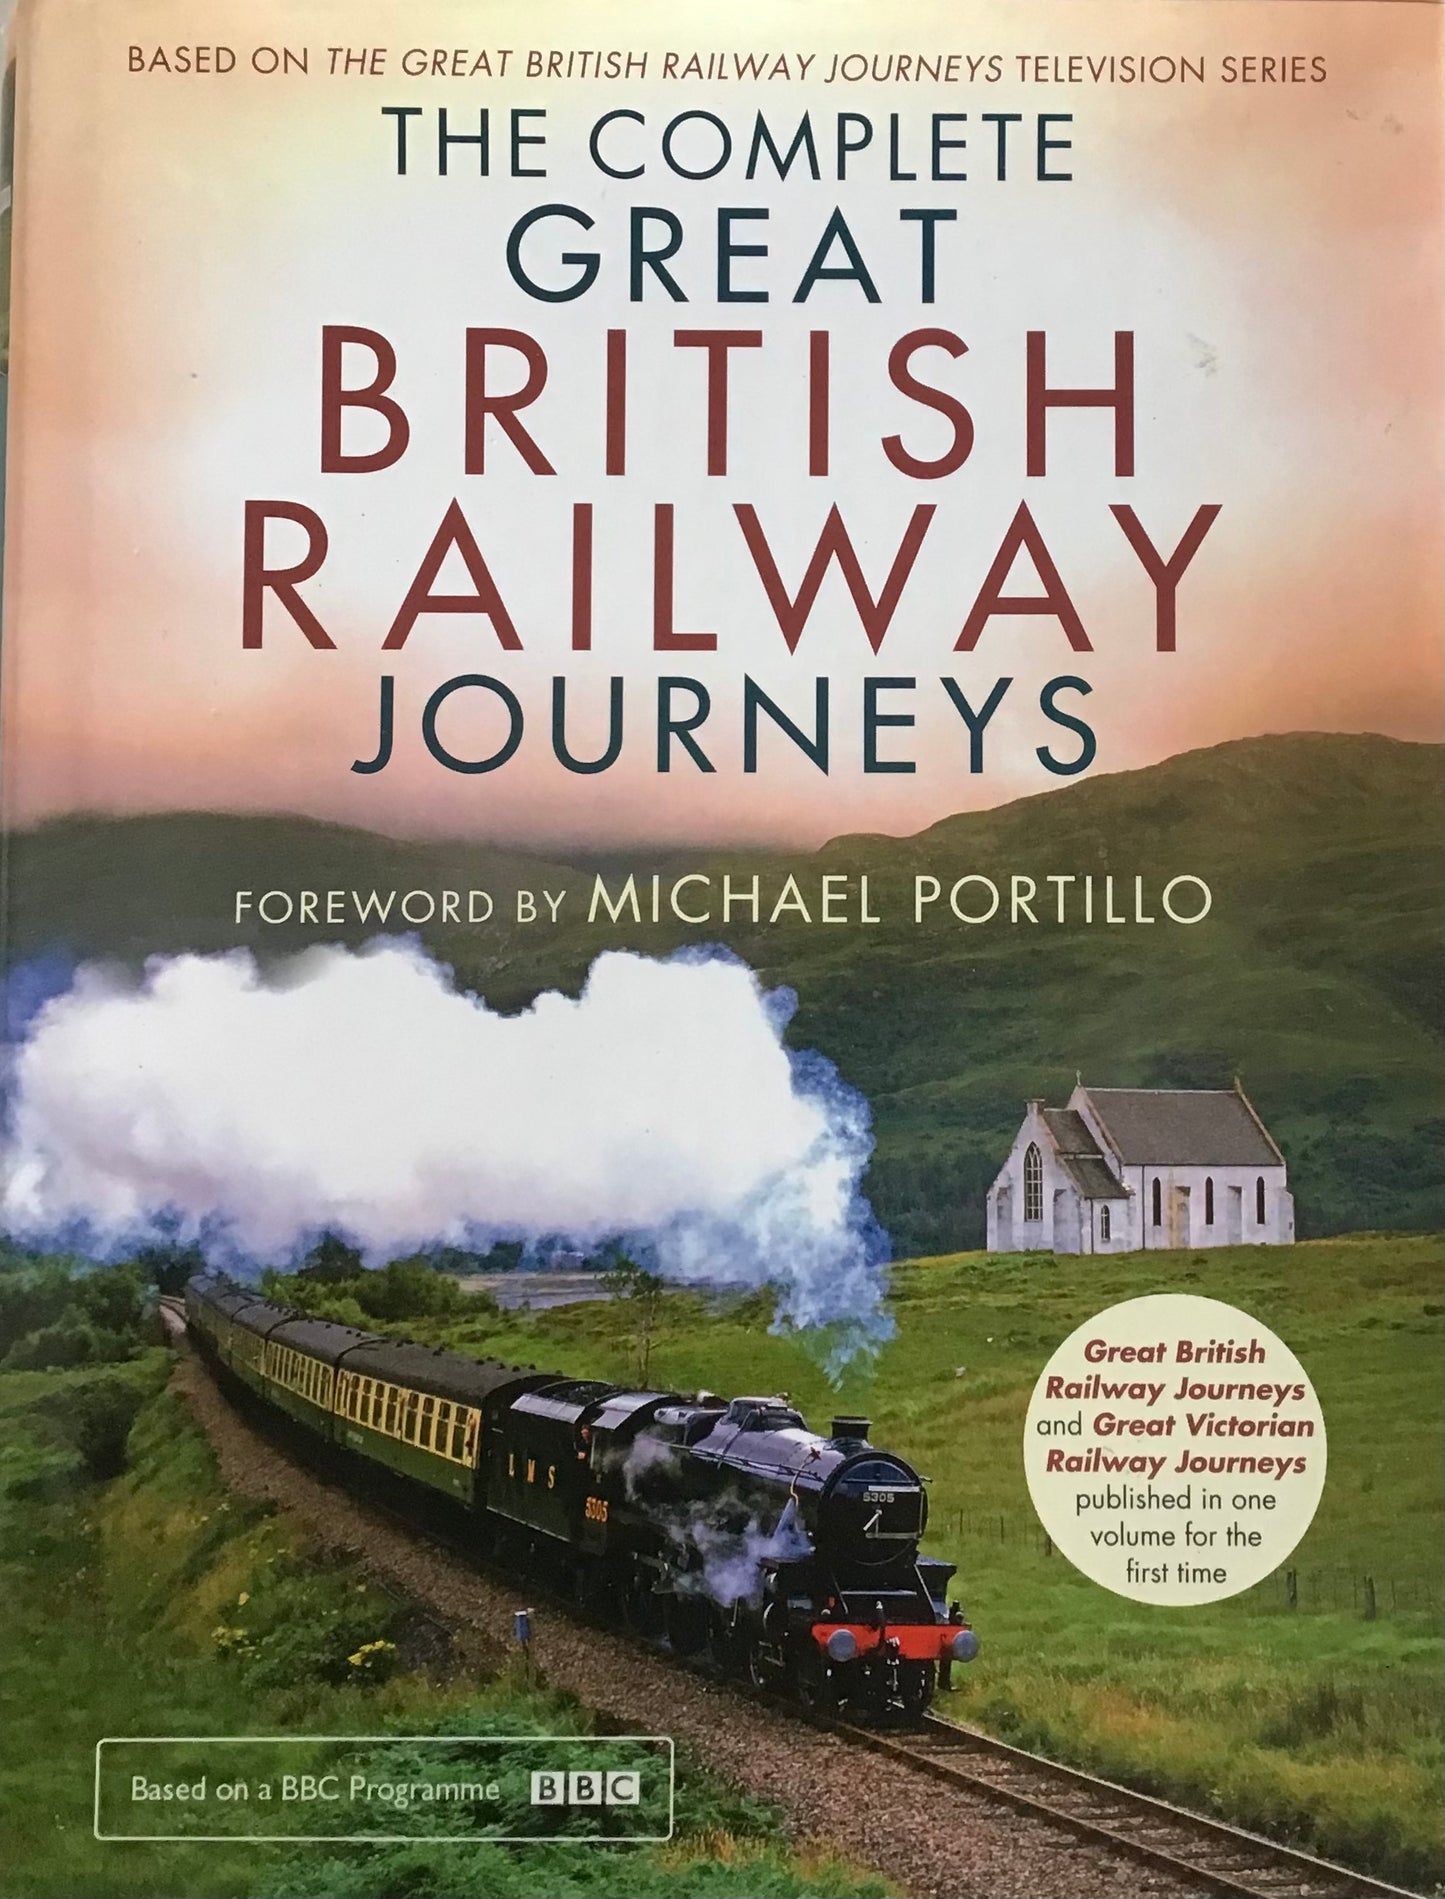 The Complete Great British Railway Journeys - Foreward by Michael Portillo (WilliamCollinsBooks.com) - Chester Model Centre